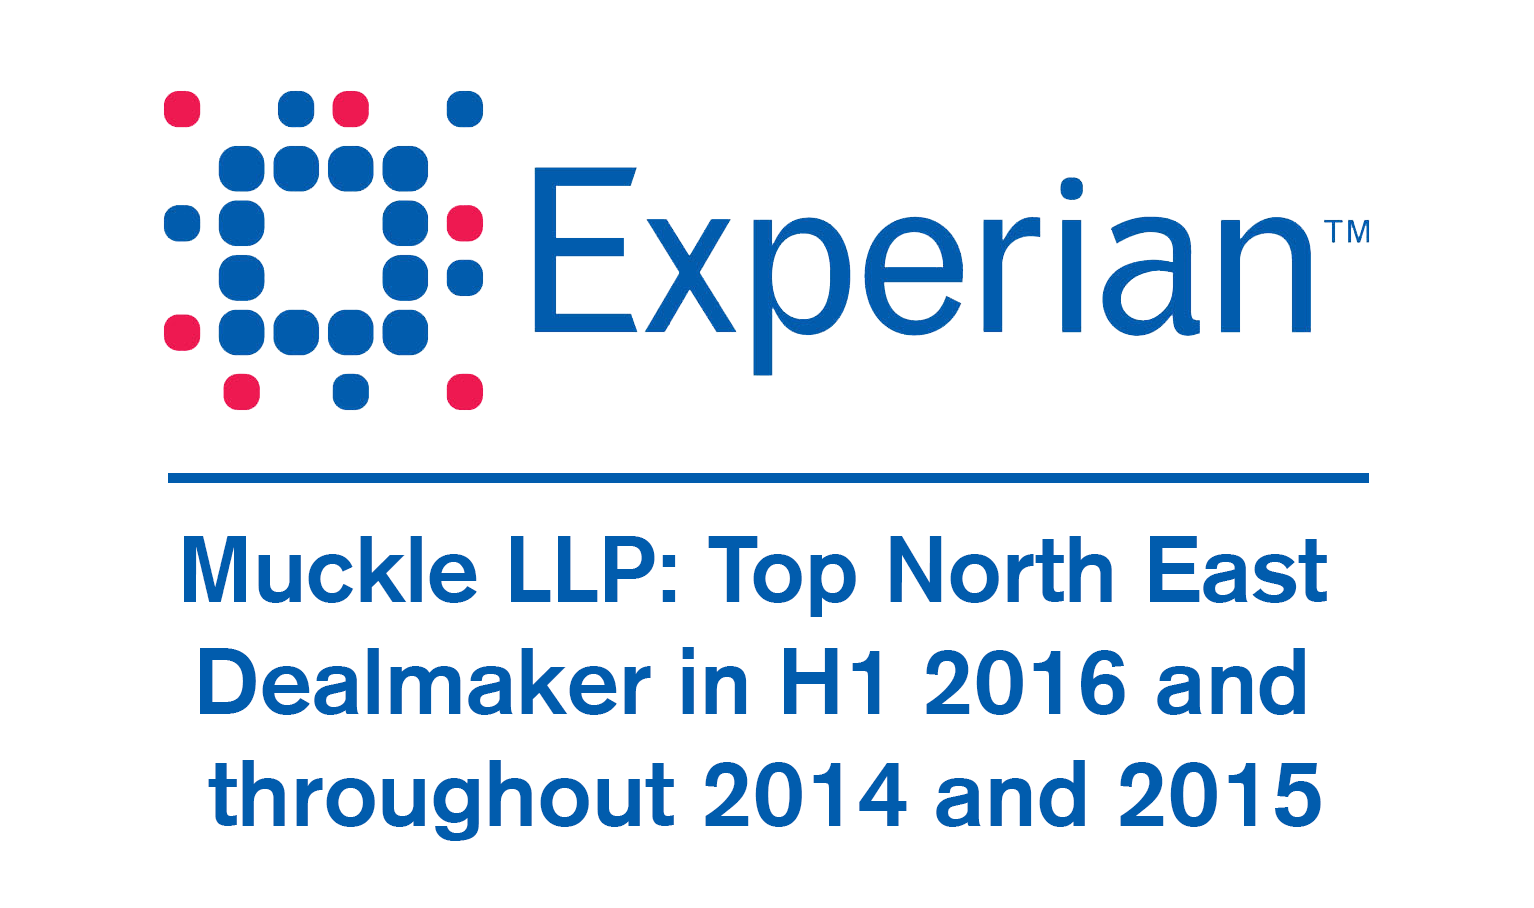 Muckle LLP ranked as top North East dealmaker for H1 2016